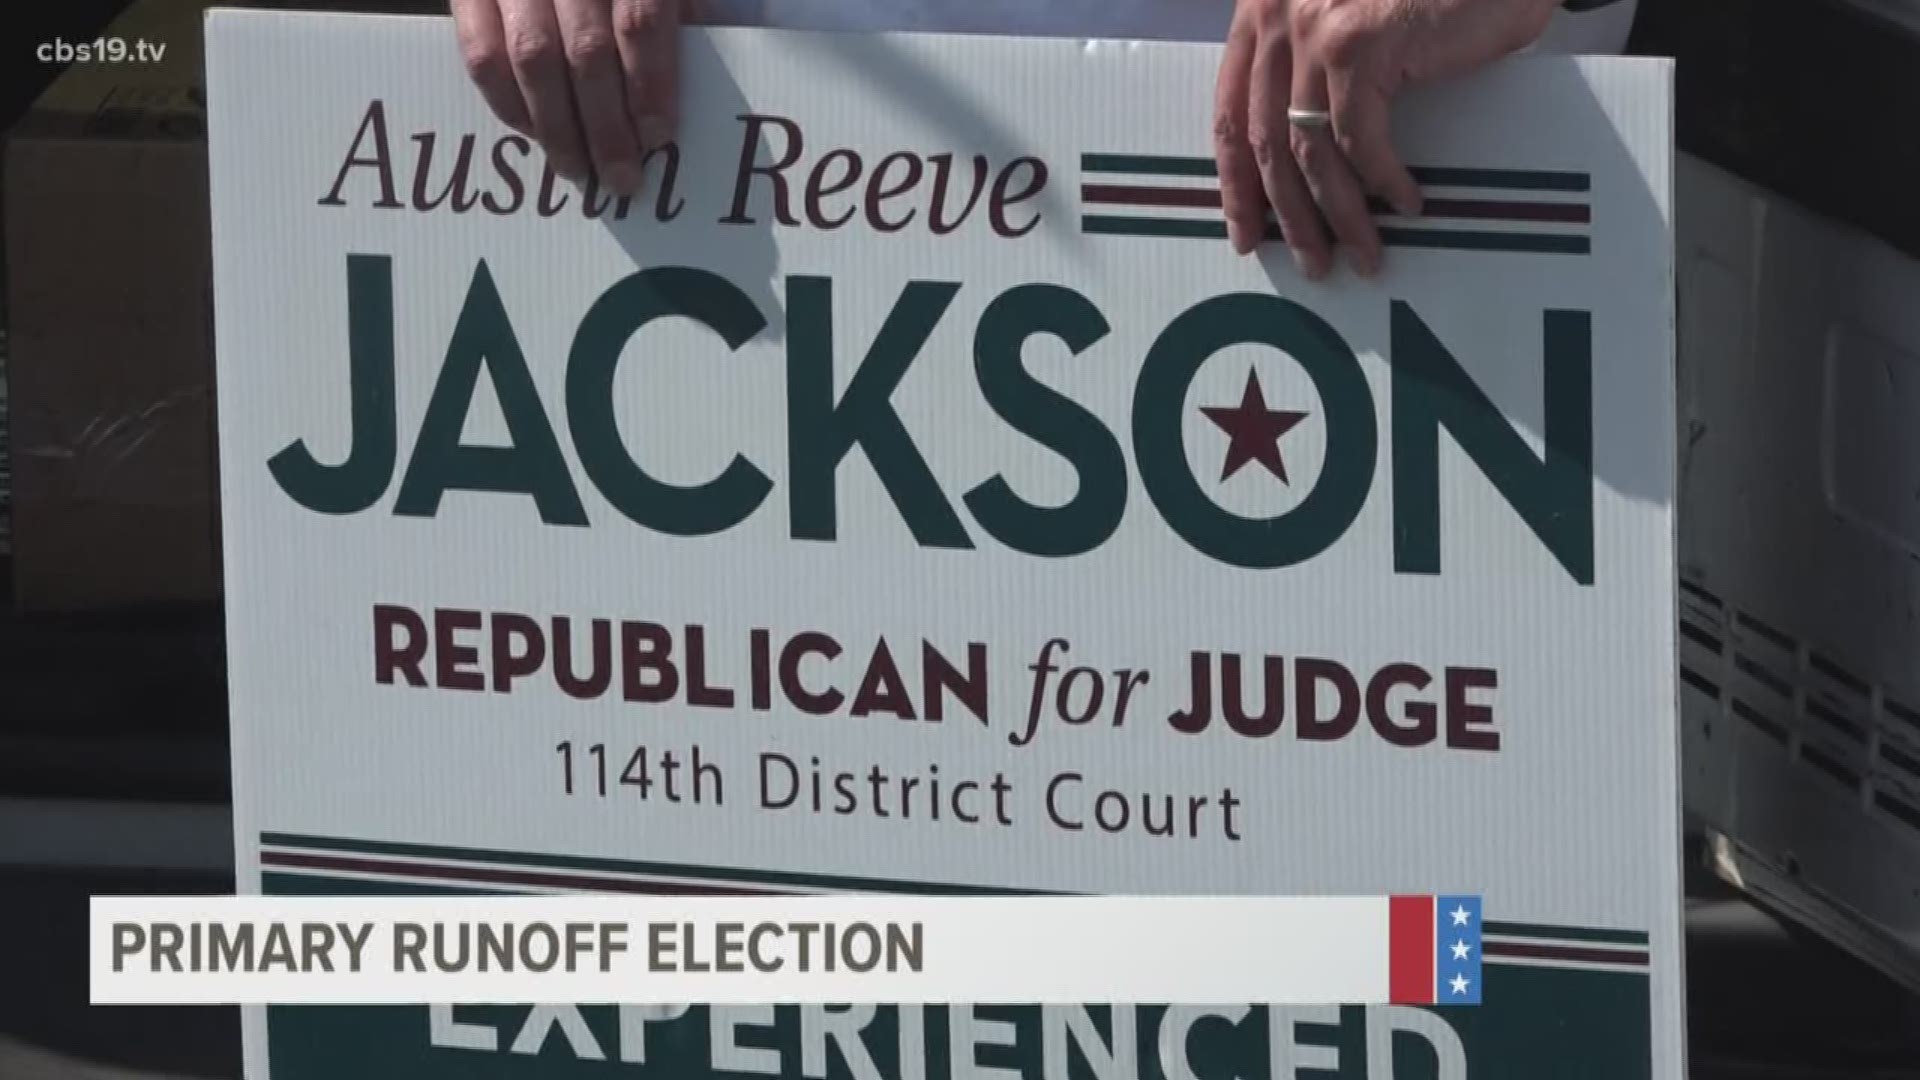 Austin Reeve Jackson will replace current 114th District Court Judge Christi Kennedy this November.